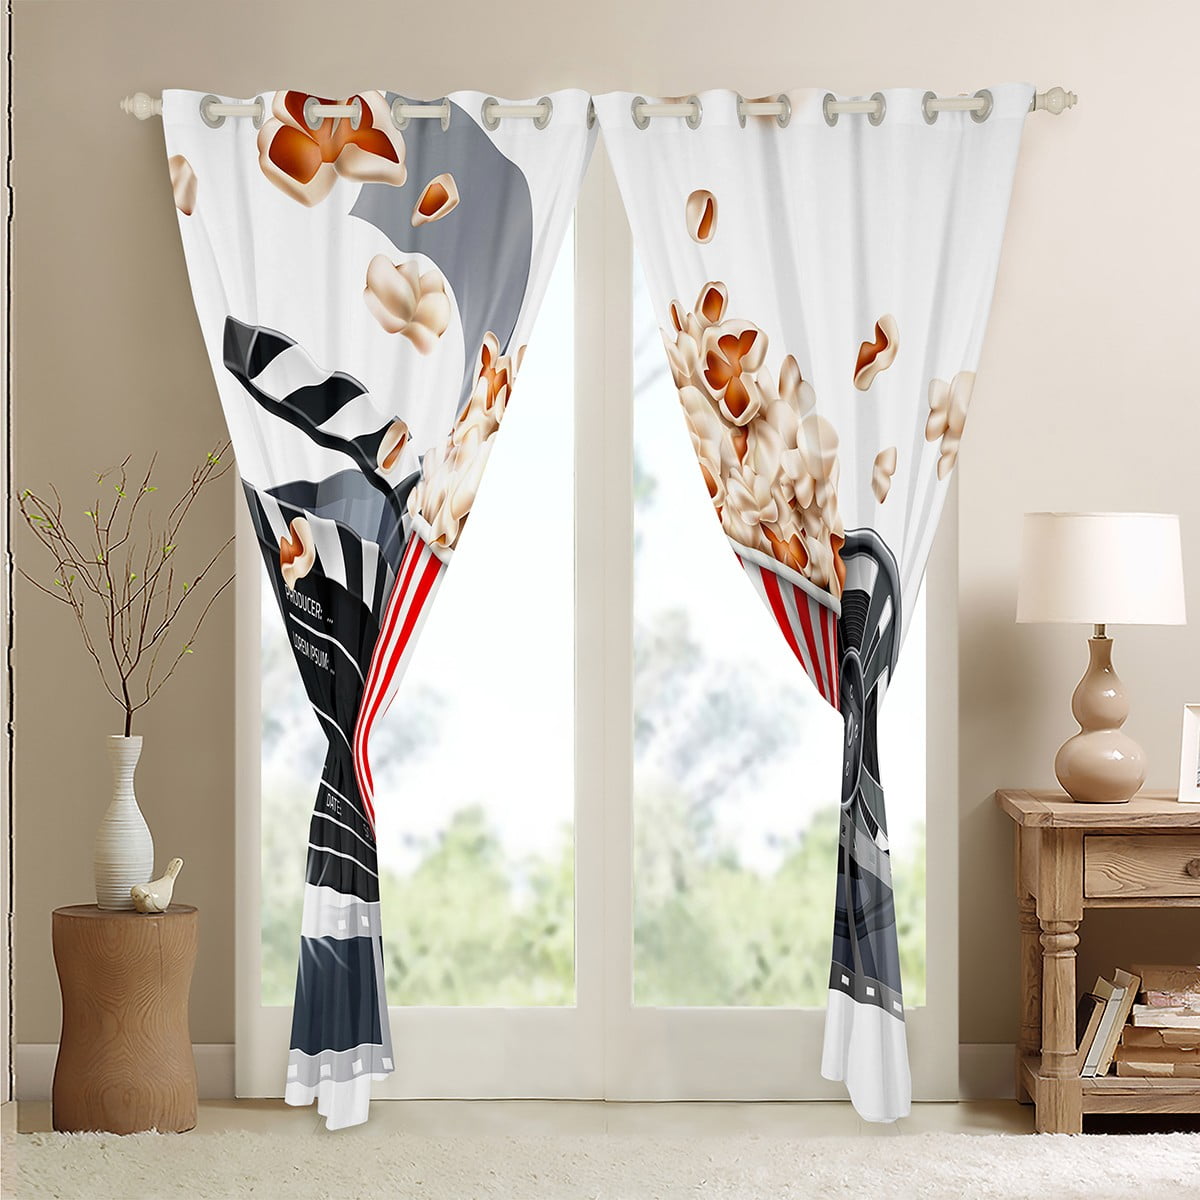 Movie Themed Curtains Vintage Cinema Style Blackout Curtains,Film Theme  Bedroom Curtains for Family Women Men Home Theater Decor Window Curtains  Clapboard Popcorn Print Curtains,2 Panels 42Wx63L 